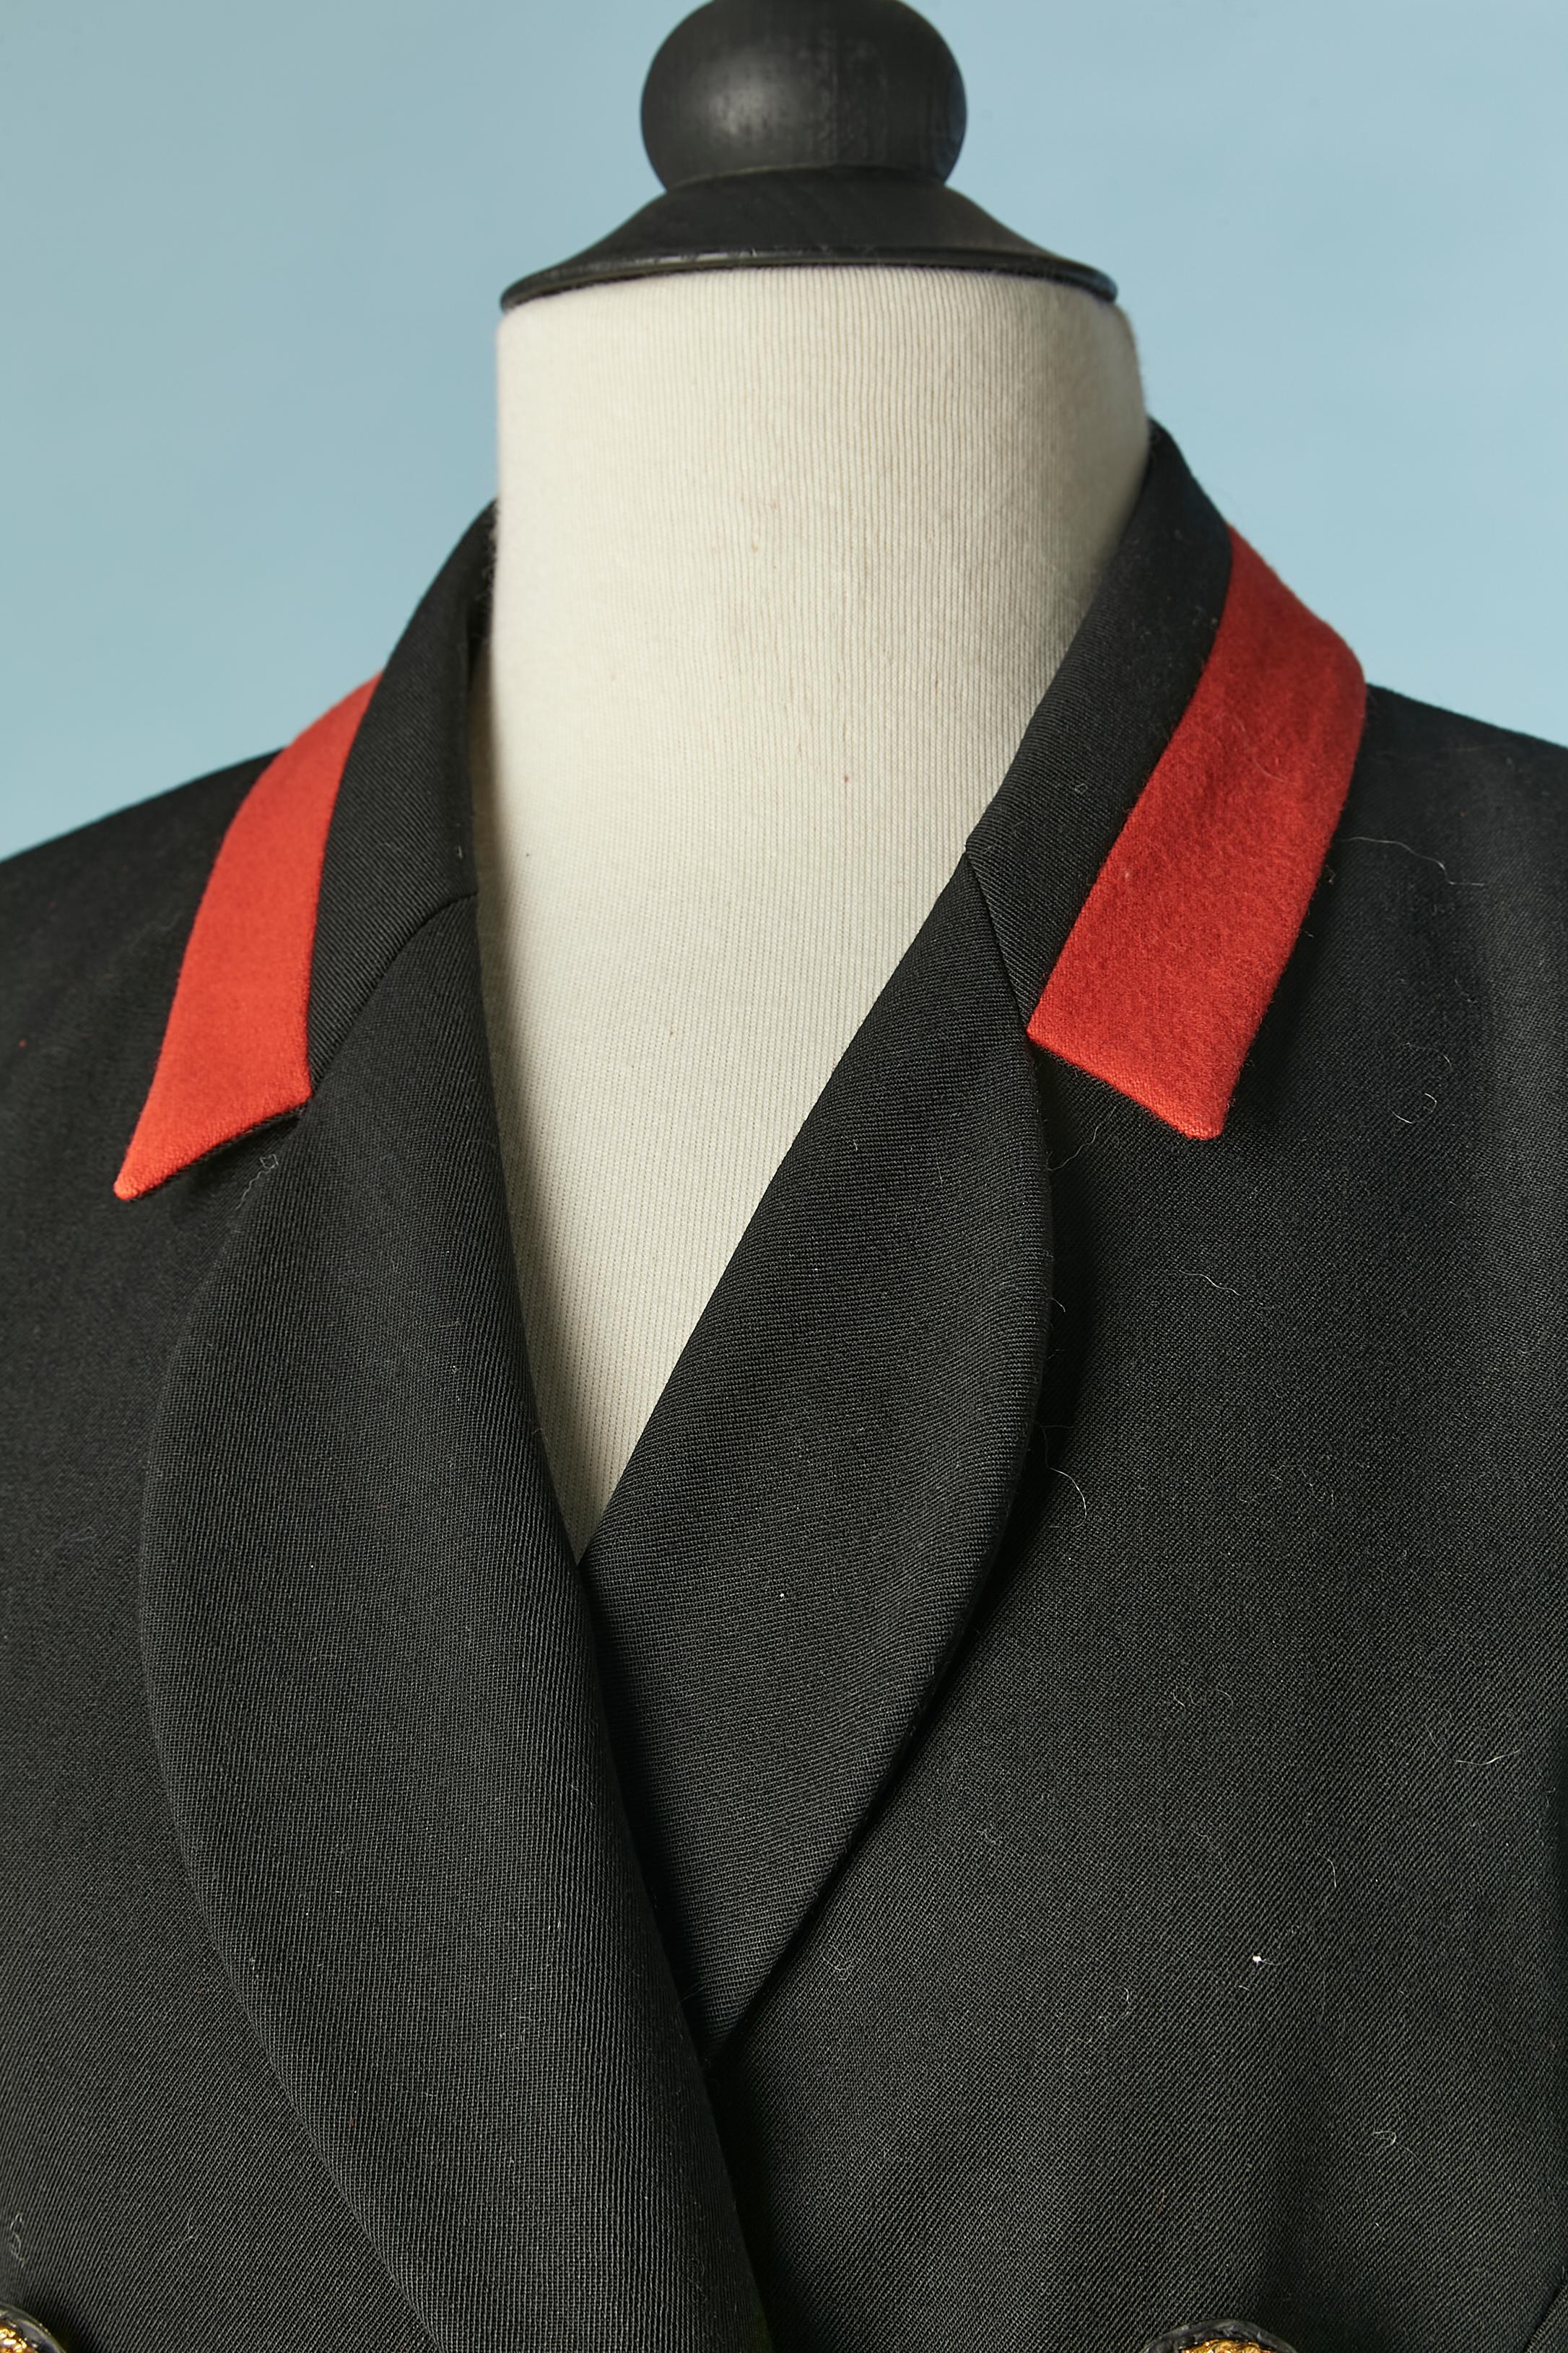 Black double-breasted jacket with gold buttons and red details . Main fabric: wool. Lining: probably acetate or rayon. 
Shoulder pads. Cut-work. 2 split in the bottom front and 3 splits in the back 
SIZE 40 (Fr) 10 (US) L 